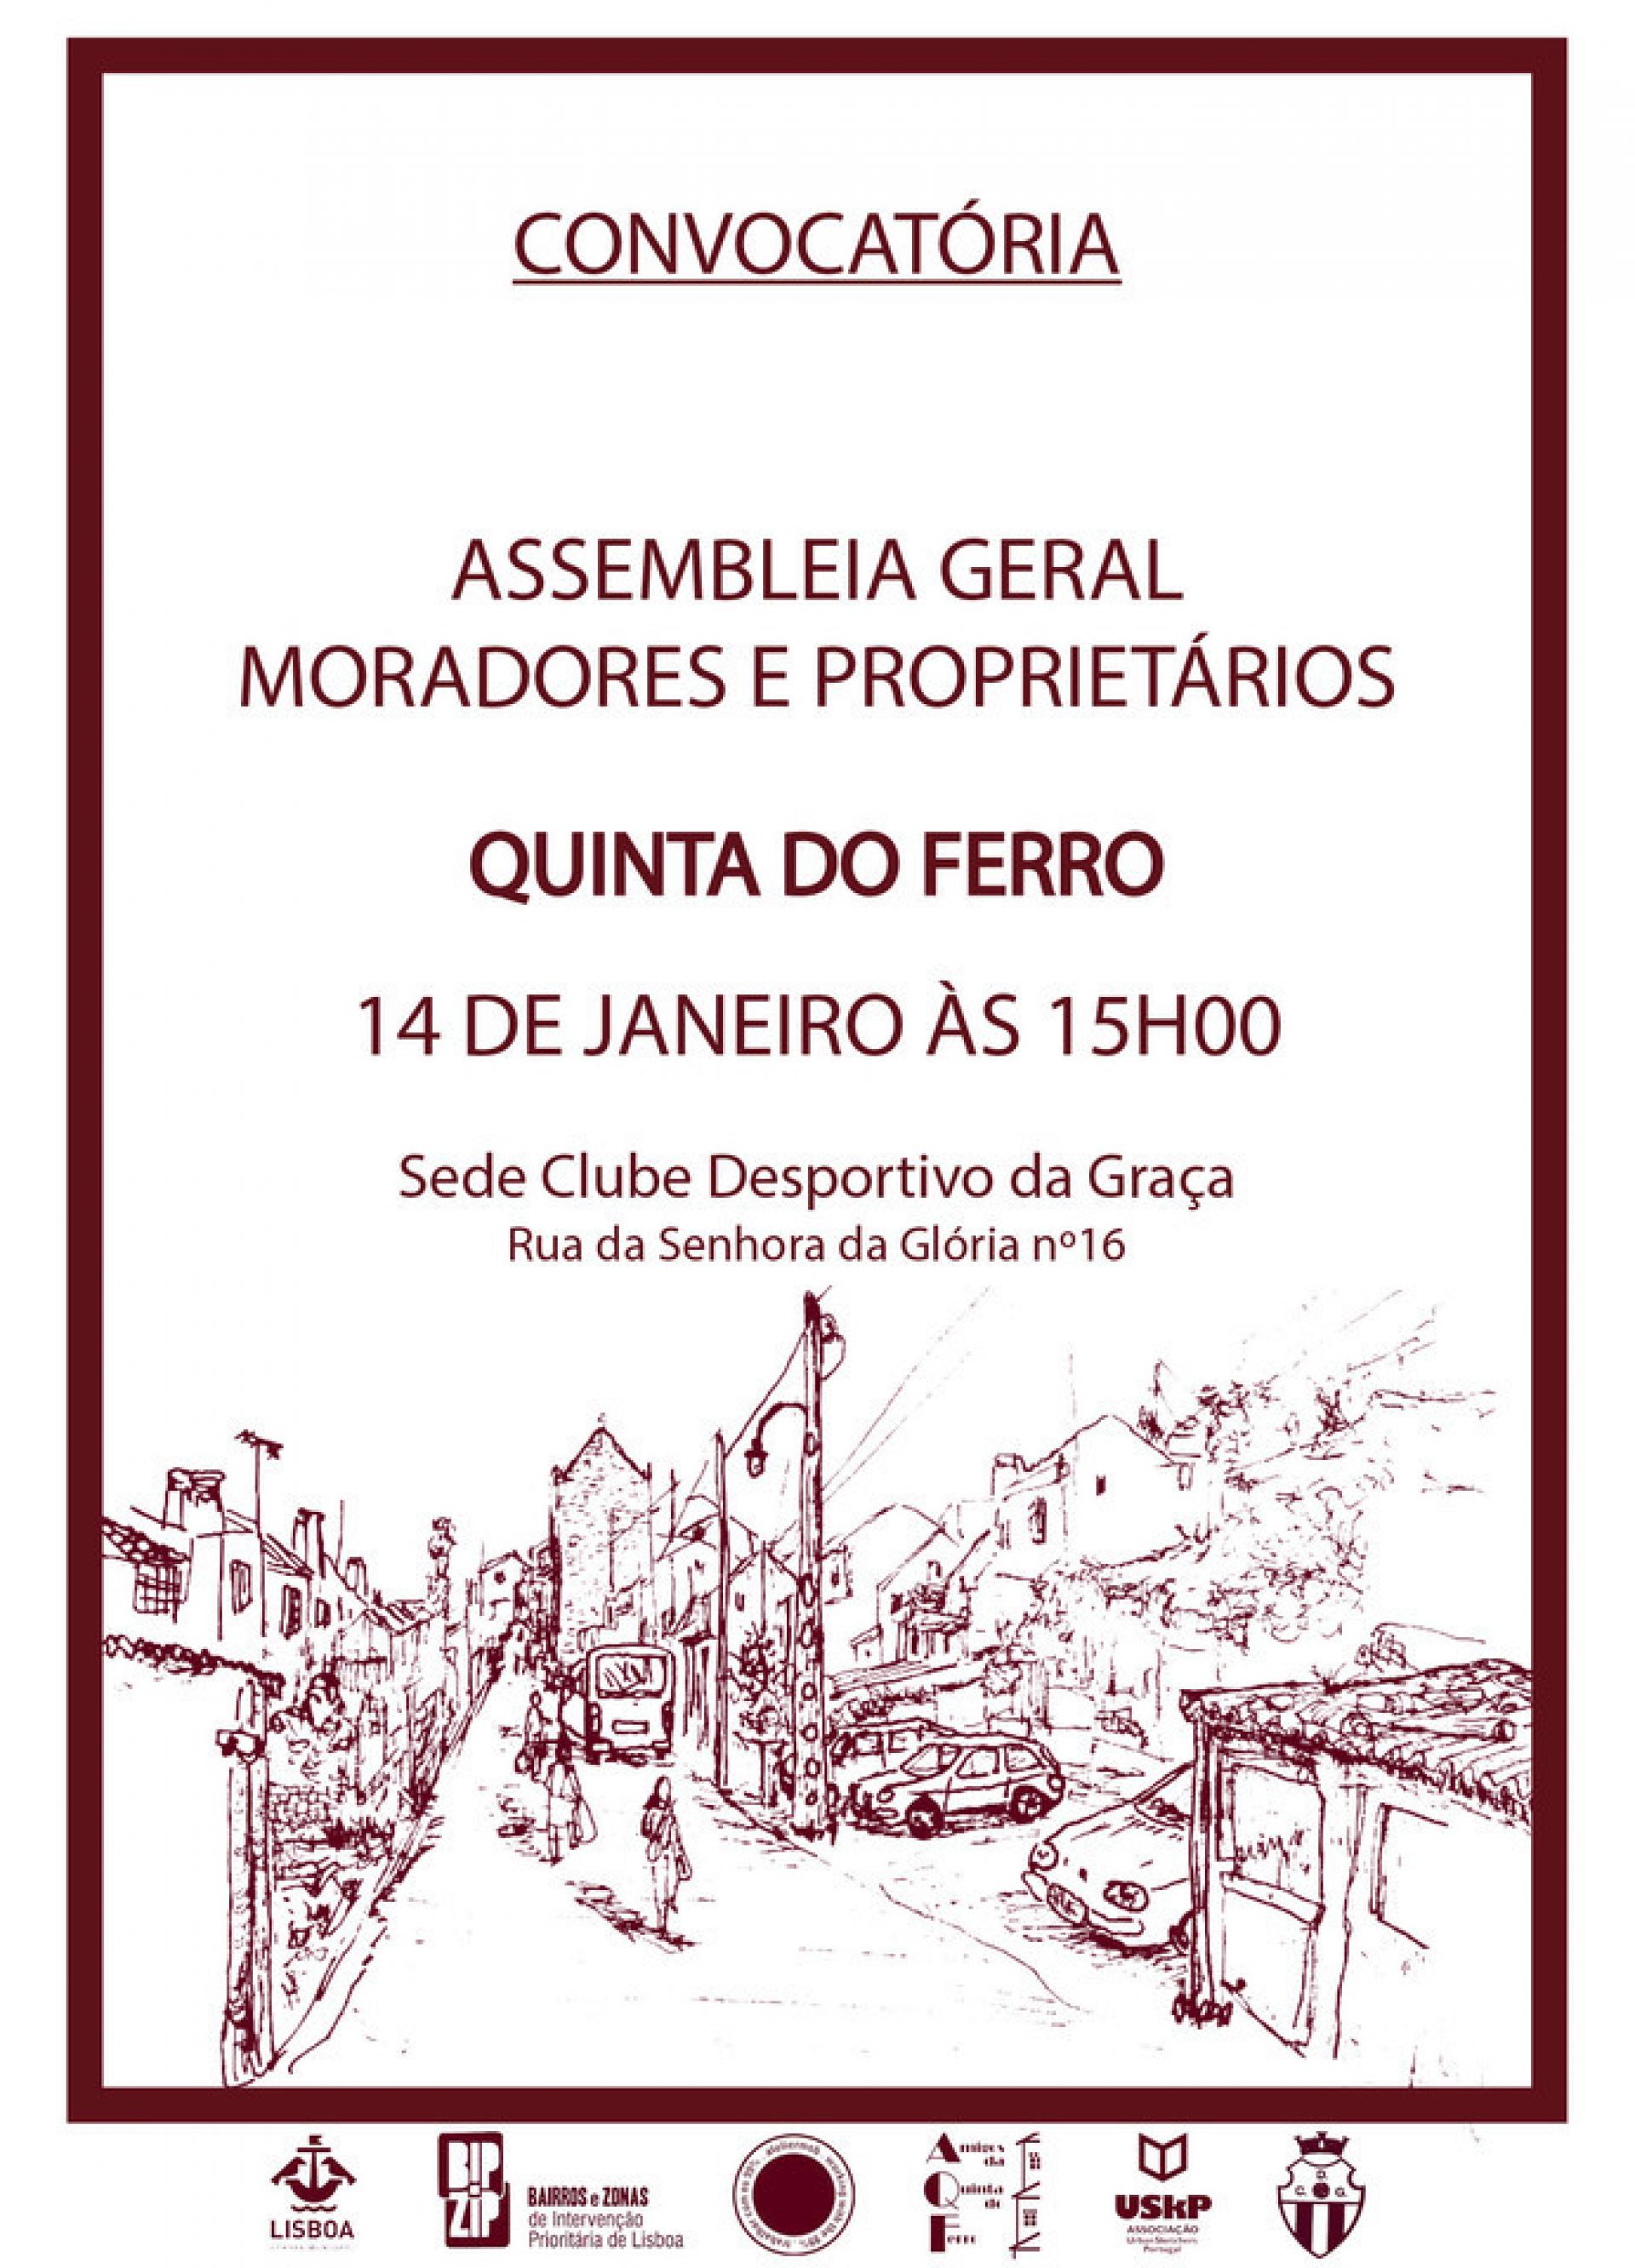 Invitation at the general assembly for dwellers and owners of Quinta do Ferro in Lisbon, organized by ateliermob.